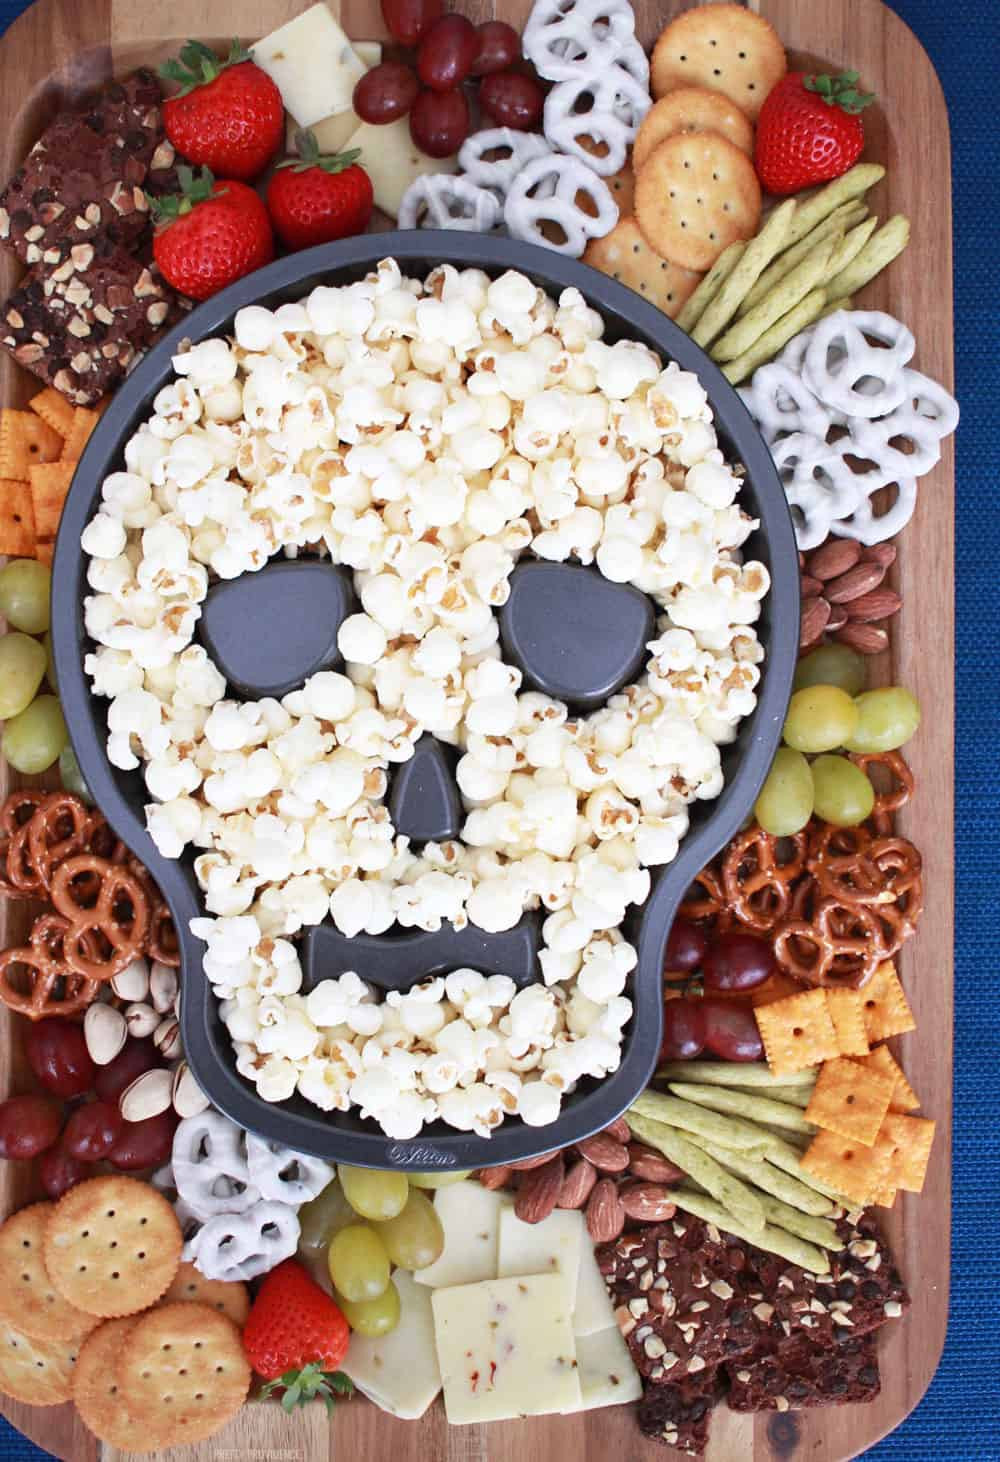 Halloween Food Ideas For A Party
 The BEST Halloween Party Treats Over the Big Moon